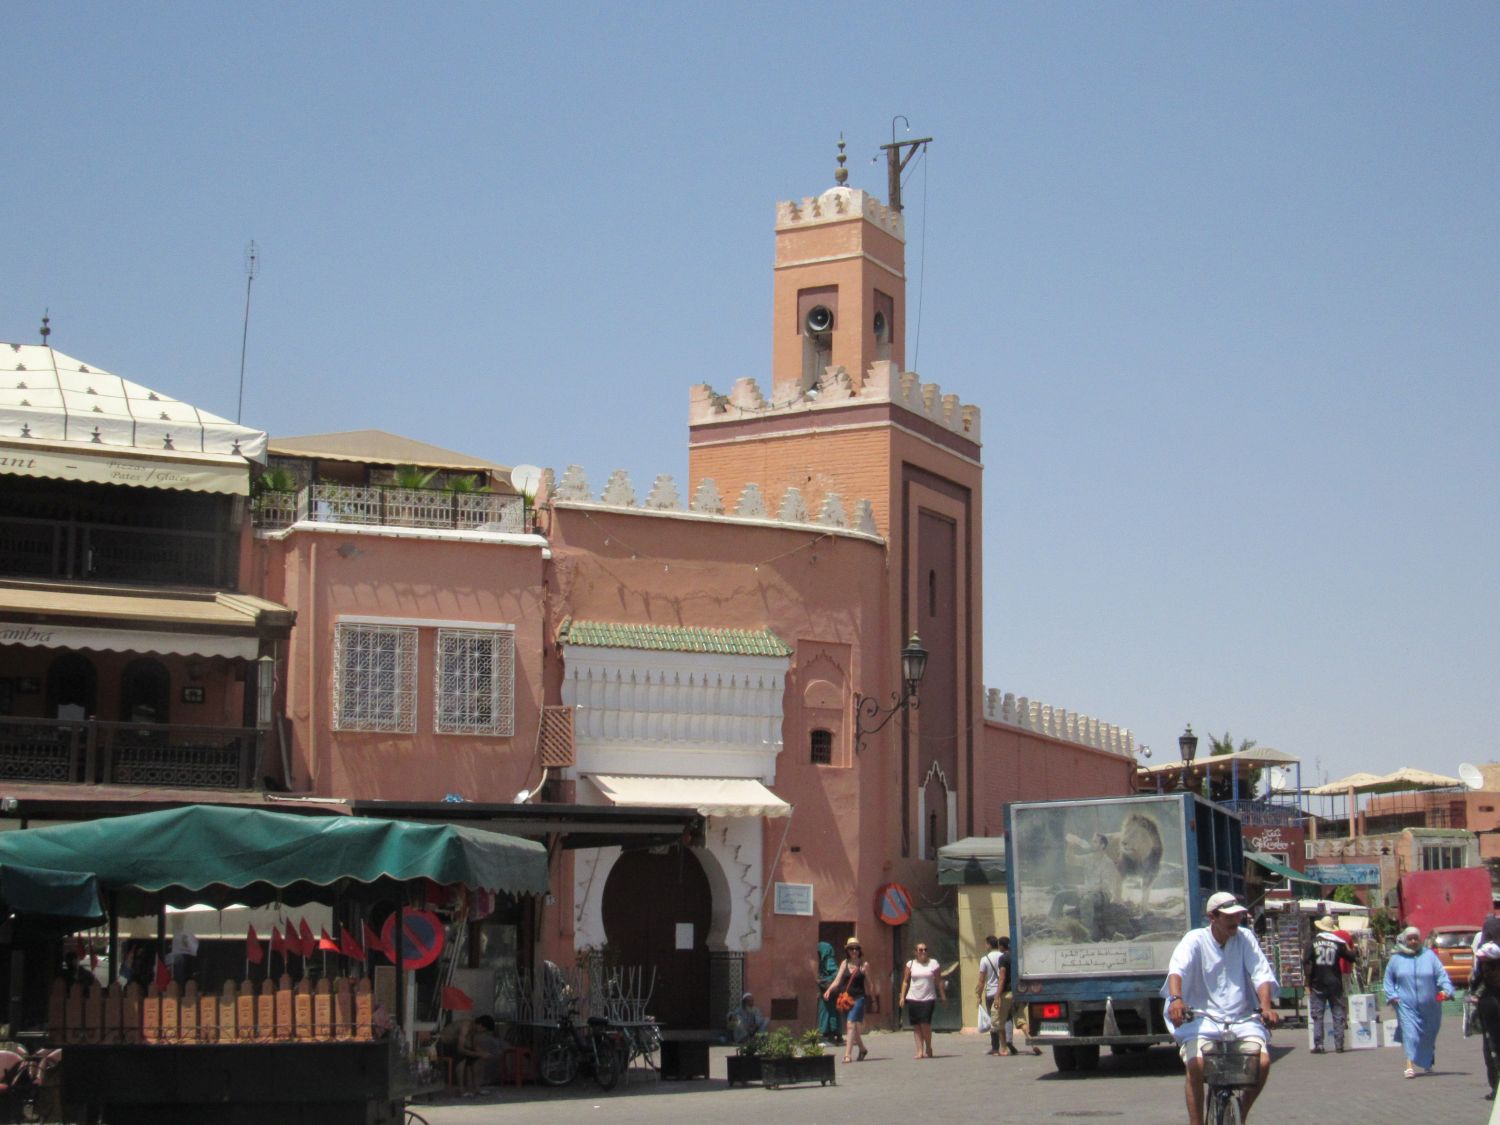 Exterior view of the portal and minaret from the square